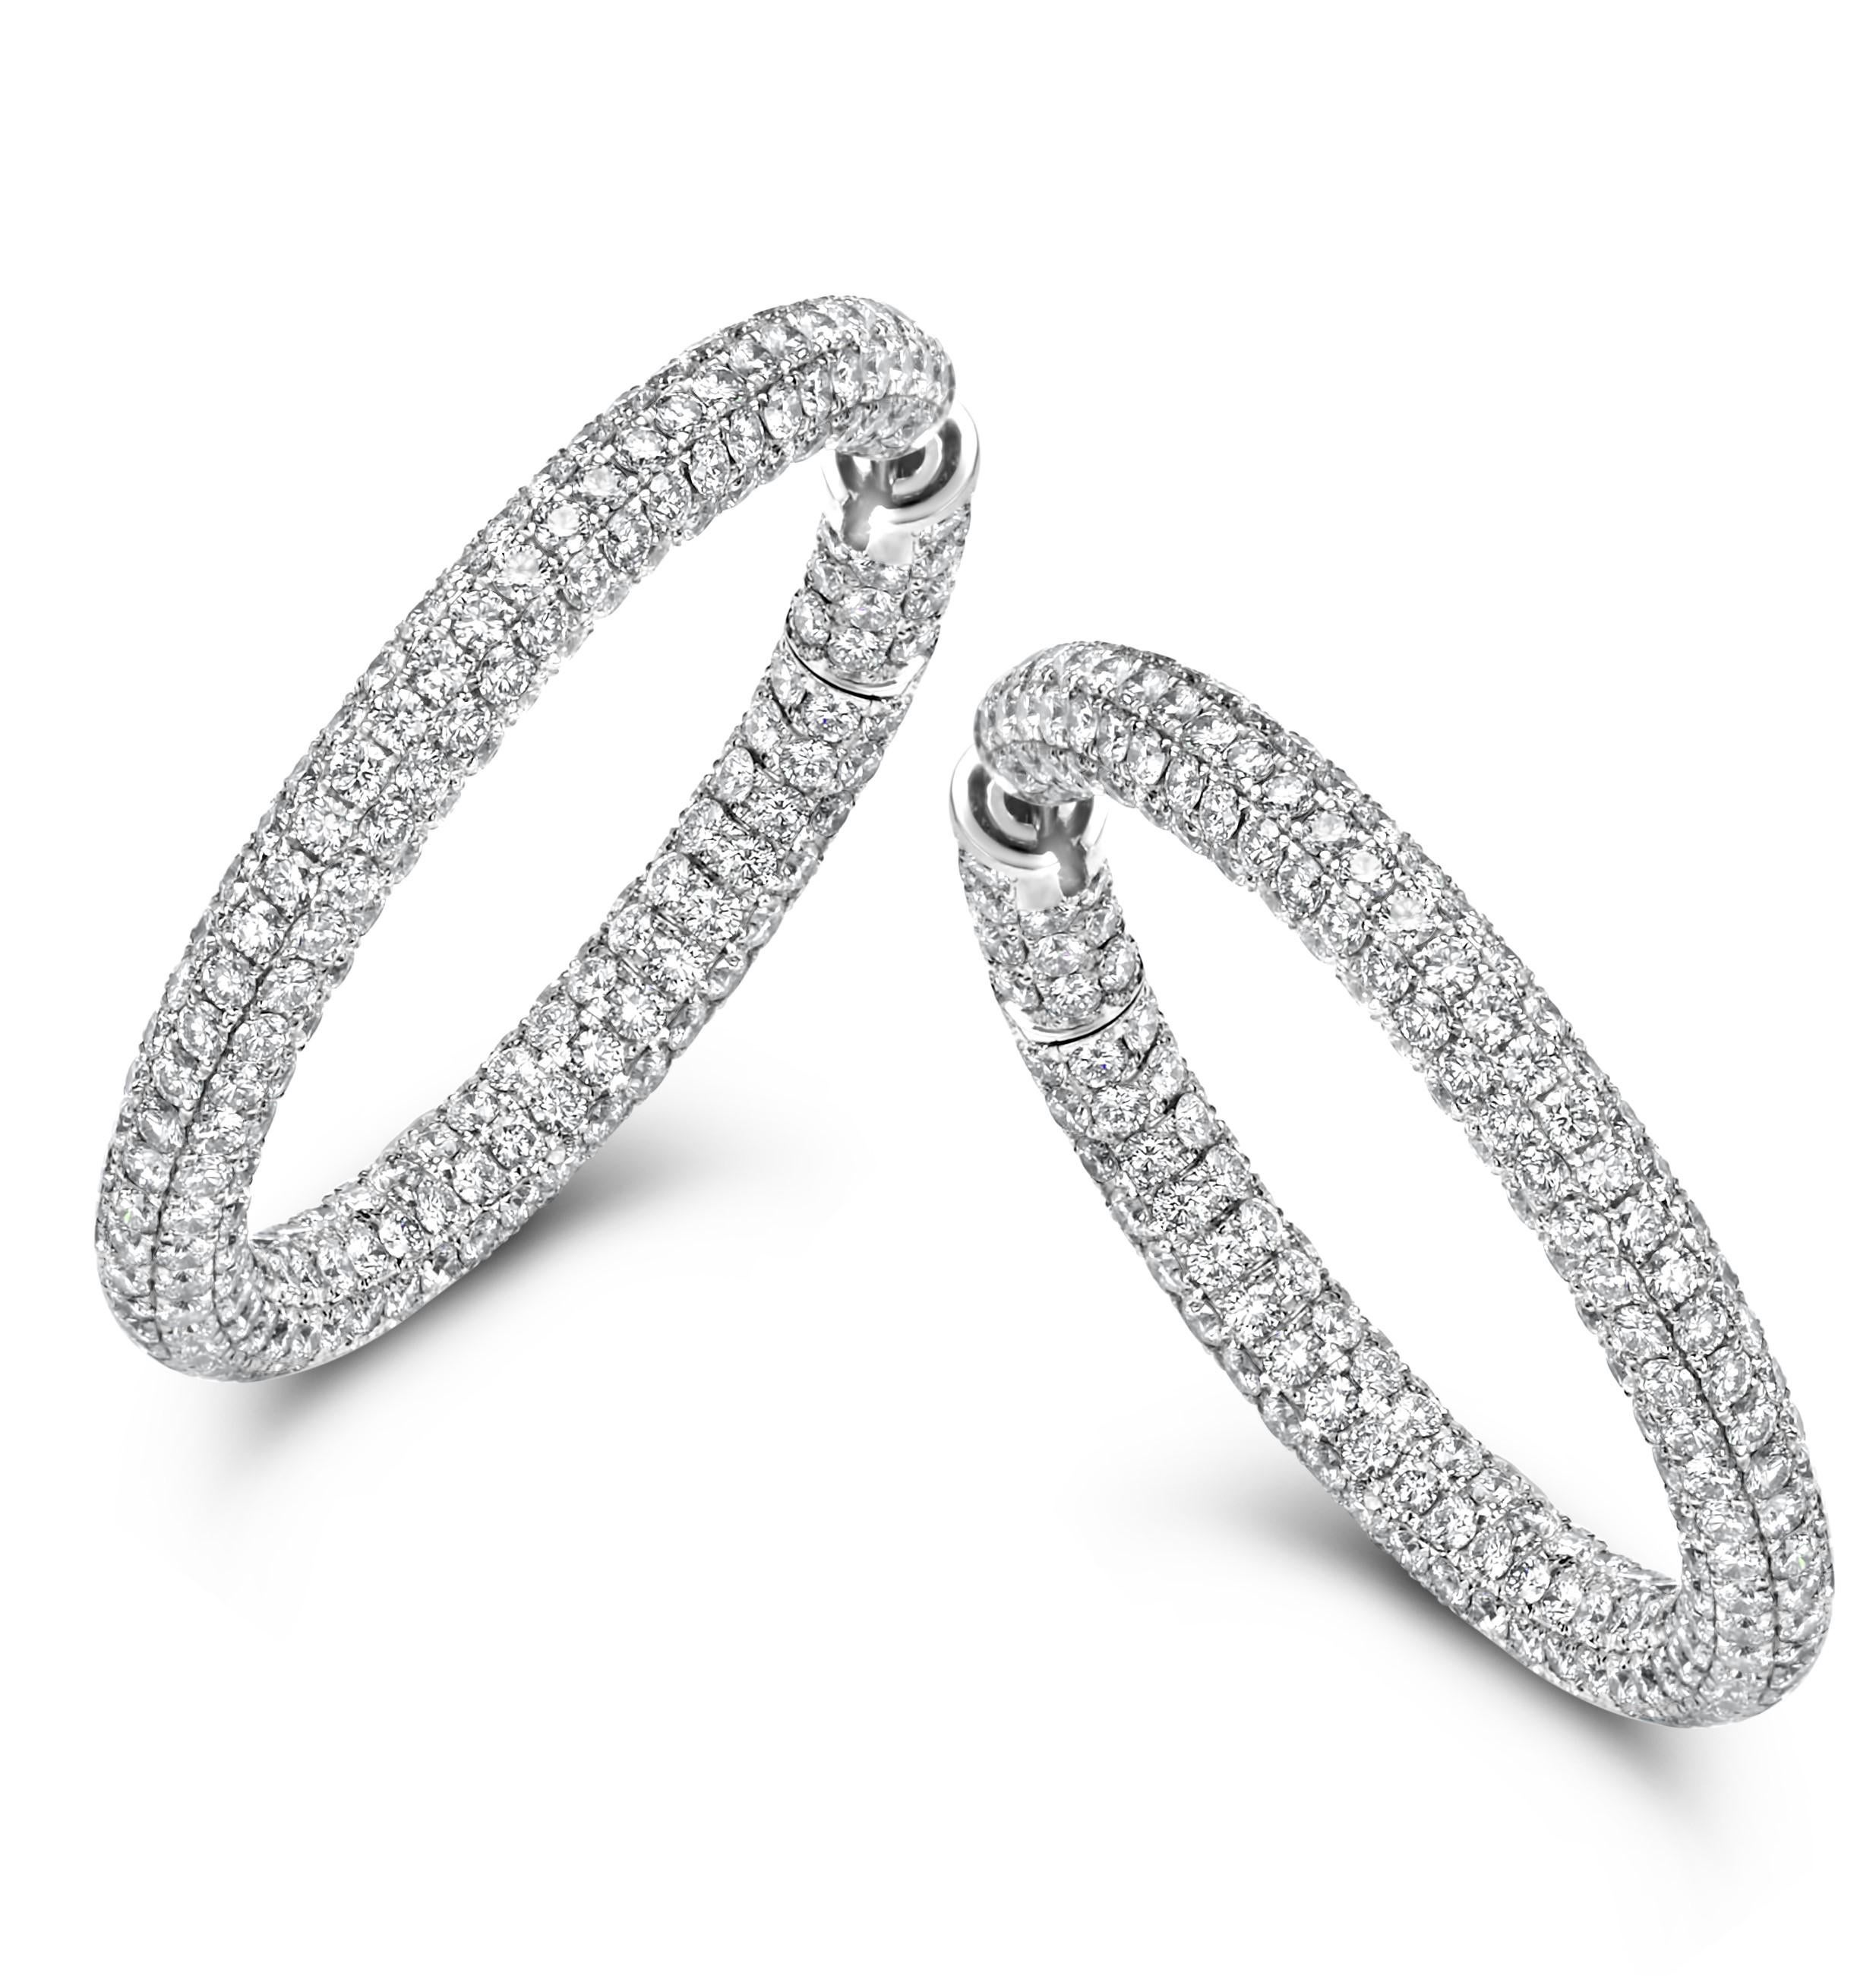 Artisan Magnificent 18 Karat White Gold Hoop Earrings with 22.6 Carat Diamonds For Sale